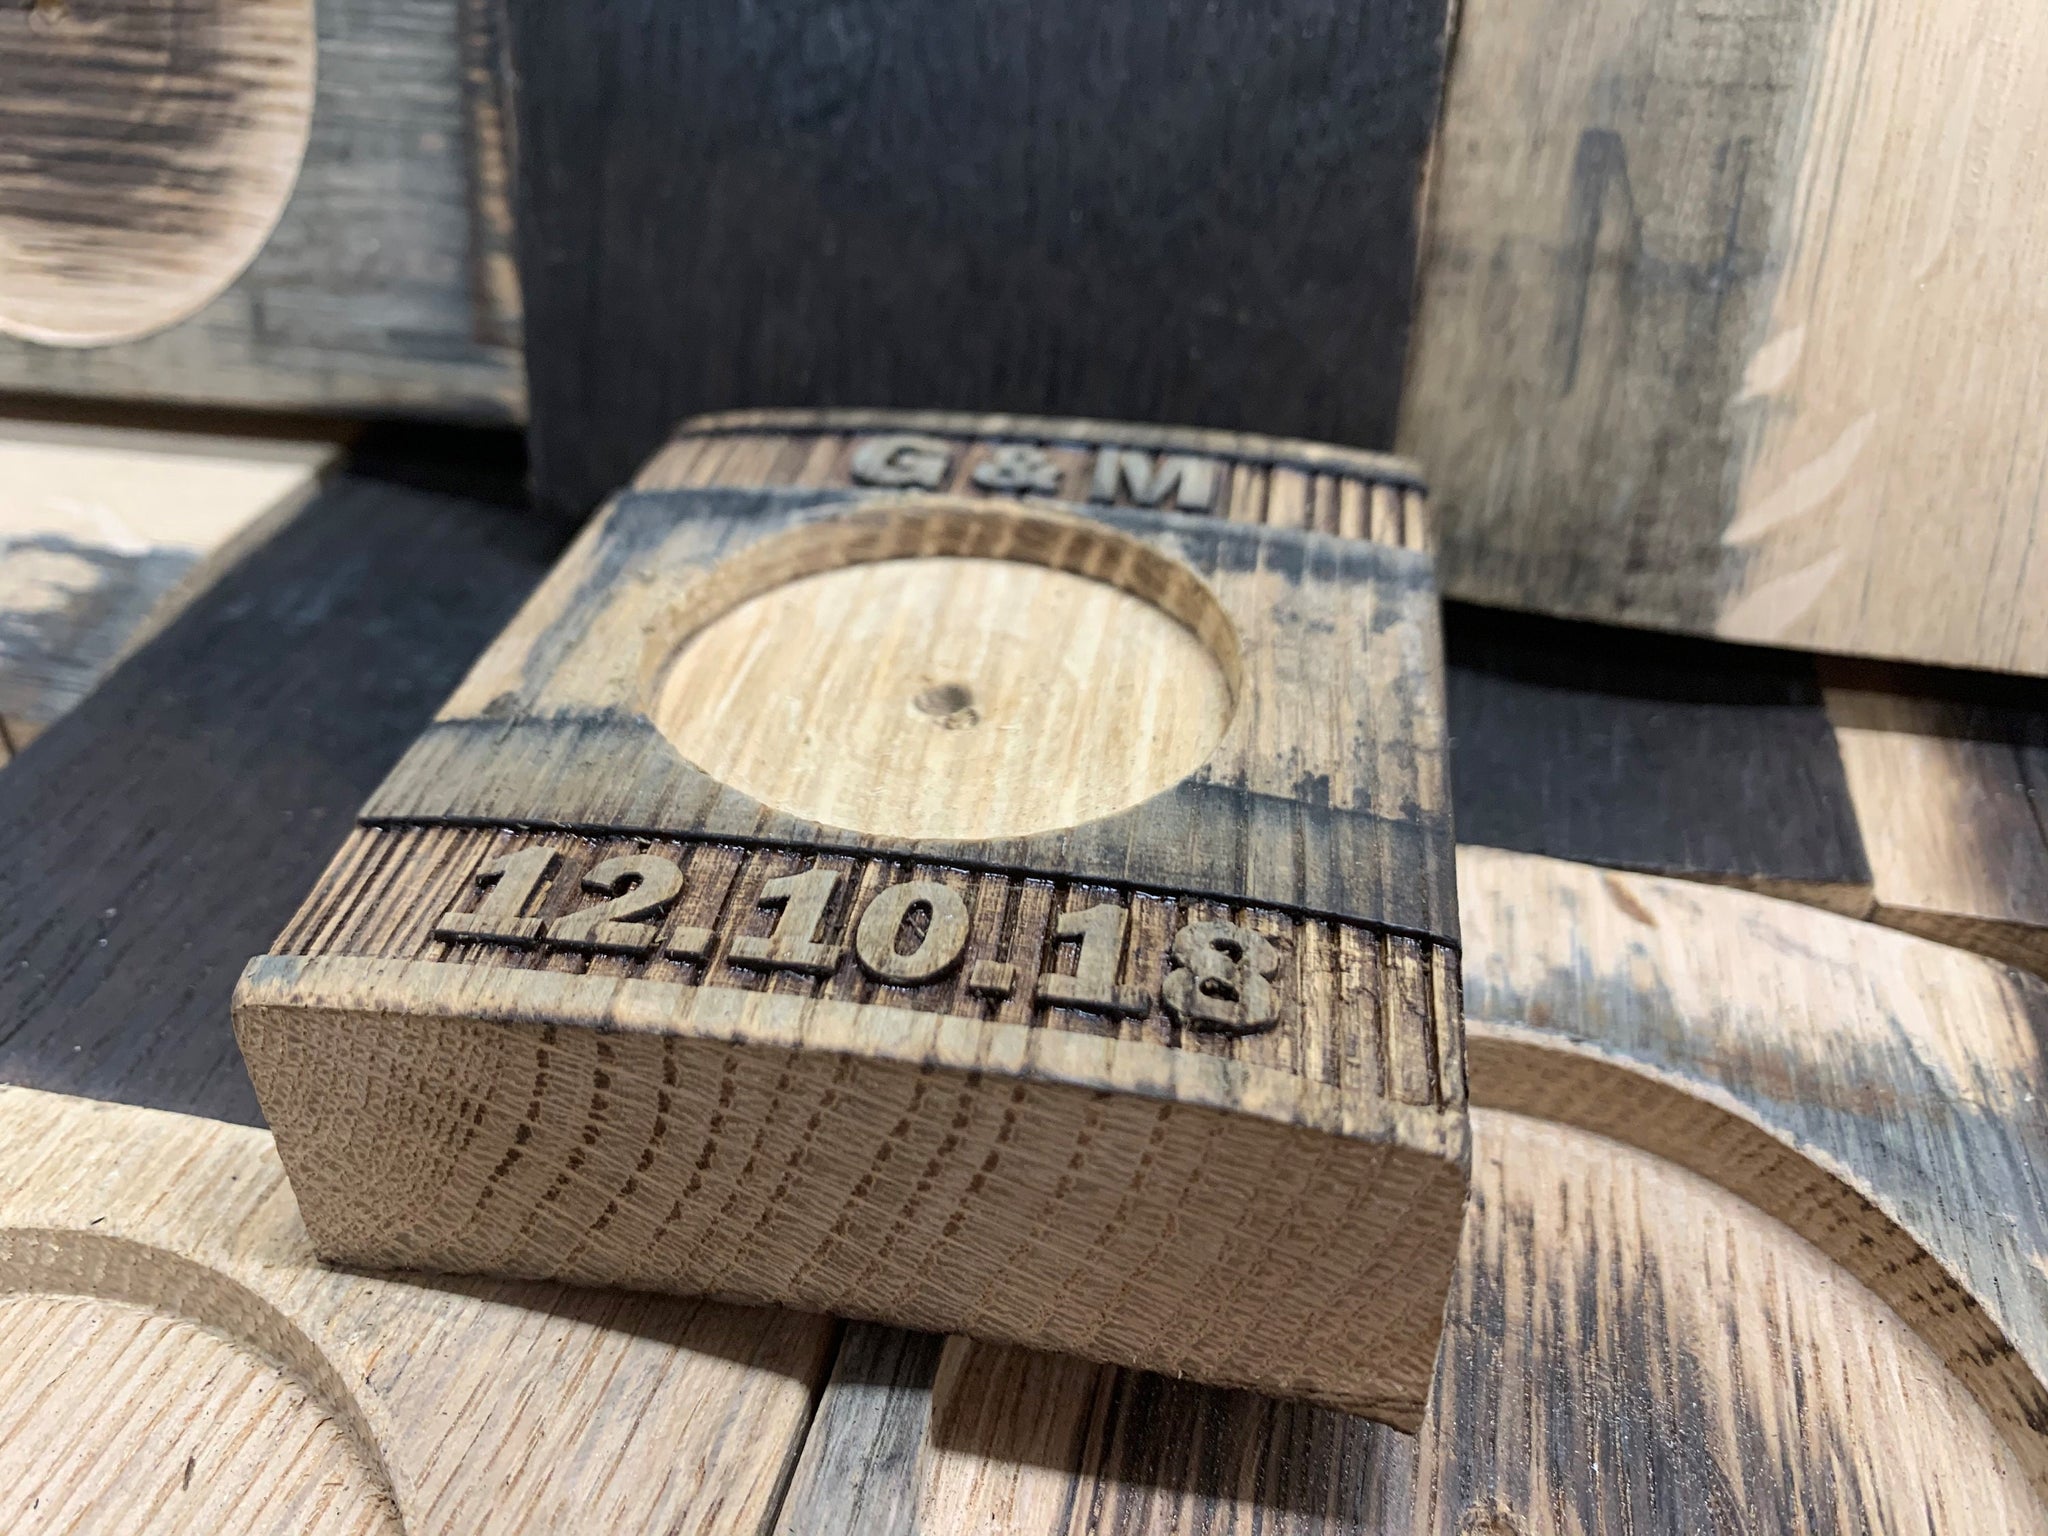 Whiskey Barrel Coaster Set - Made From A Reclaimed Whiskey Barrel Stave